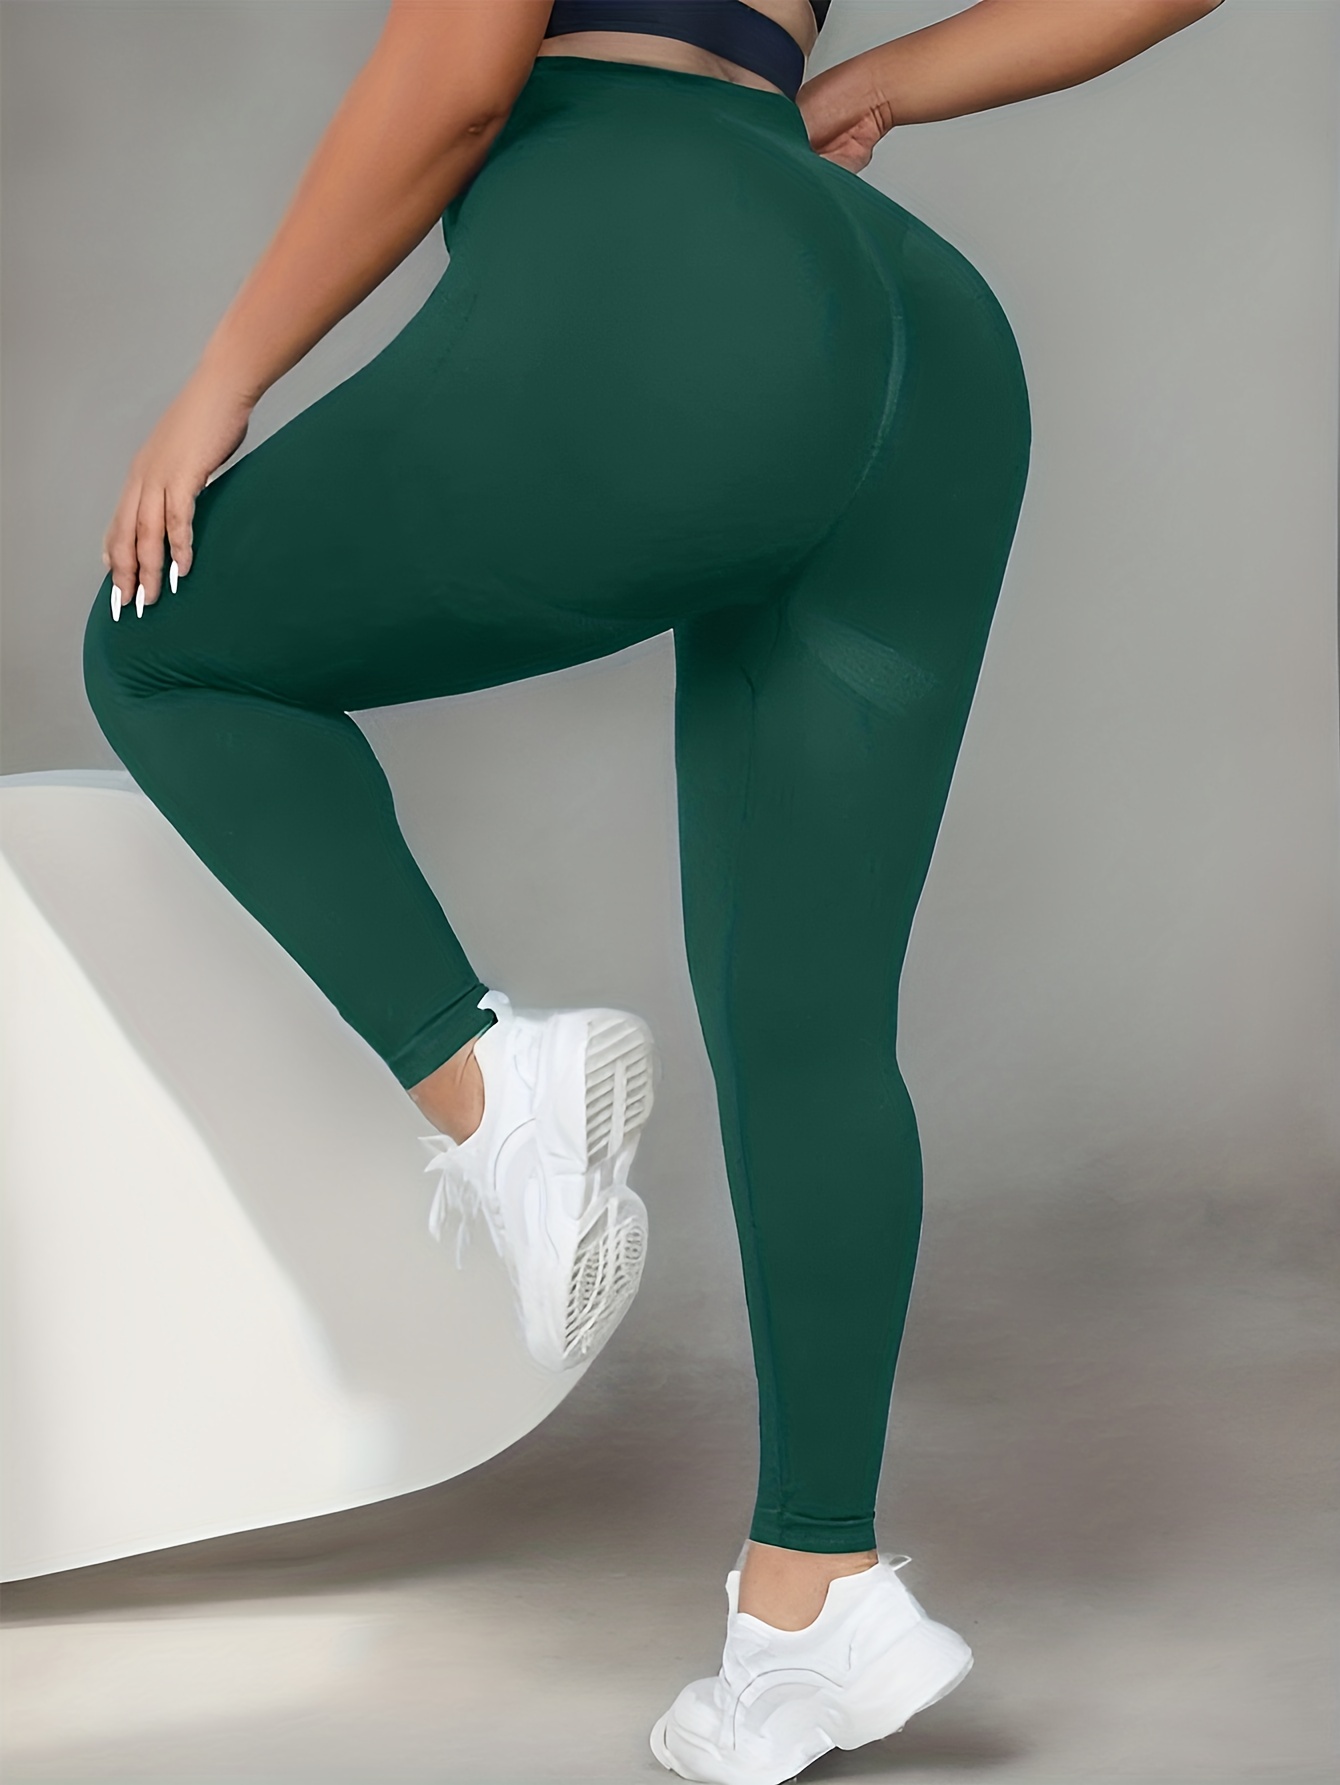  BALEAF Nuleaf High Waisted Workout Leggings for Women 25 -  Buttery Soft Tummy Control Gym Fitness Sport Yoga 7/8 Pants with Pockets -  Regular and Plus Size Dark Green XS 